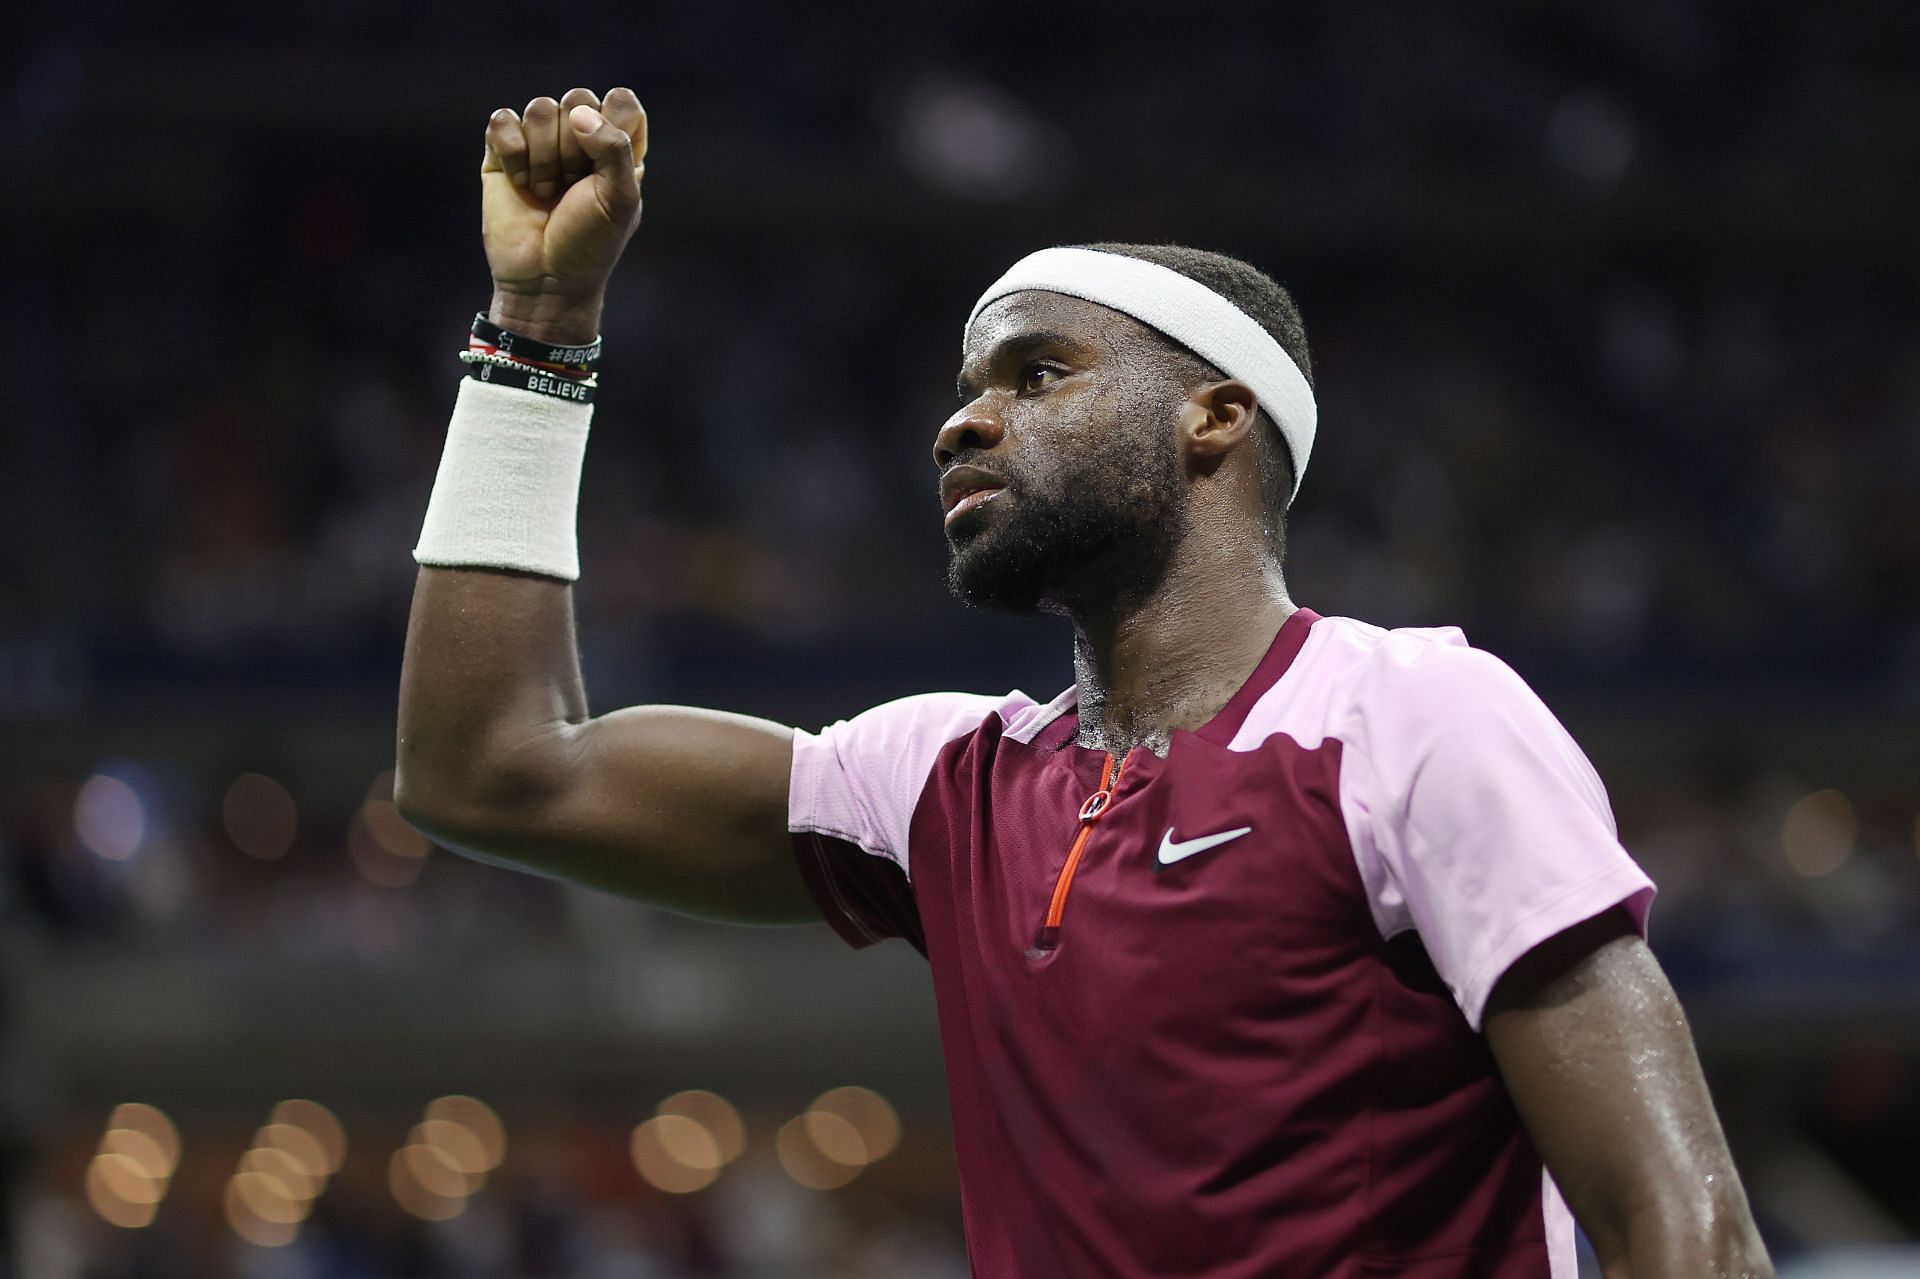 Frances Tiafoe at the 2022 US Open - Getty Images